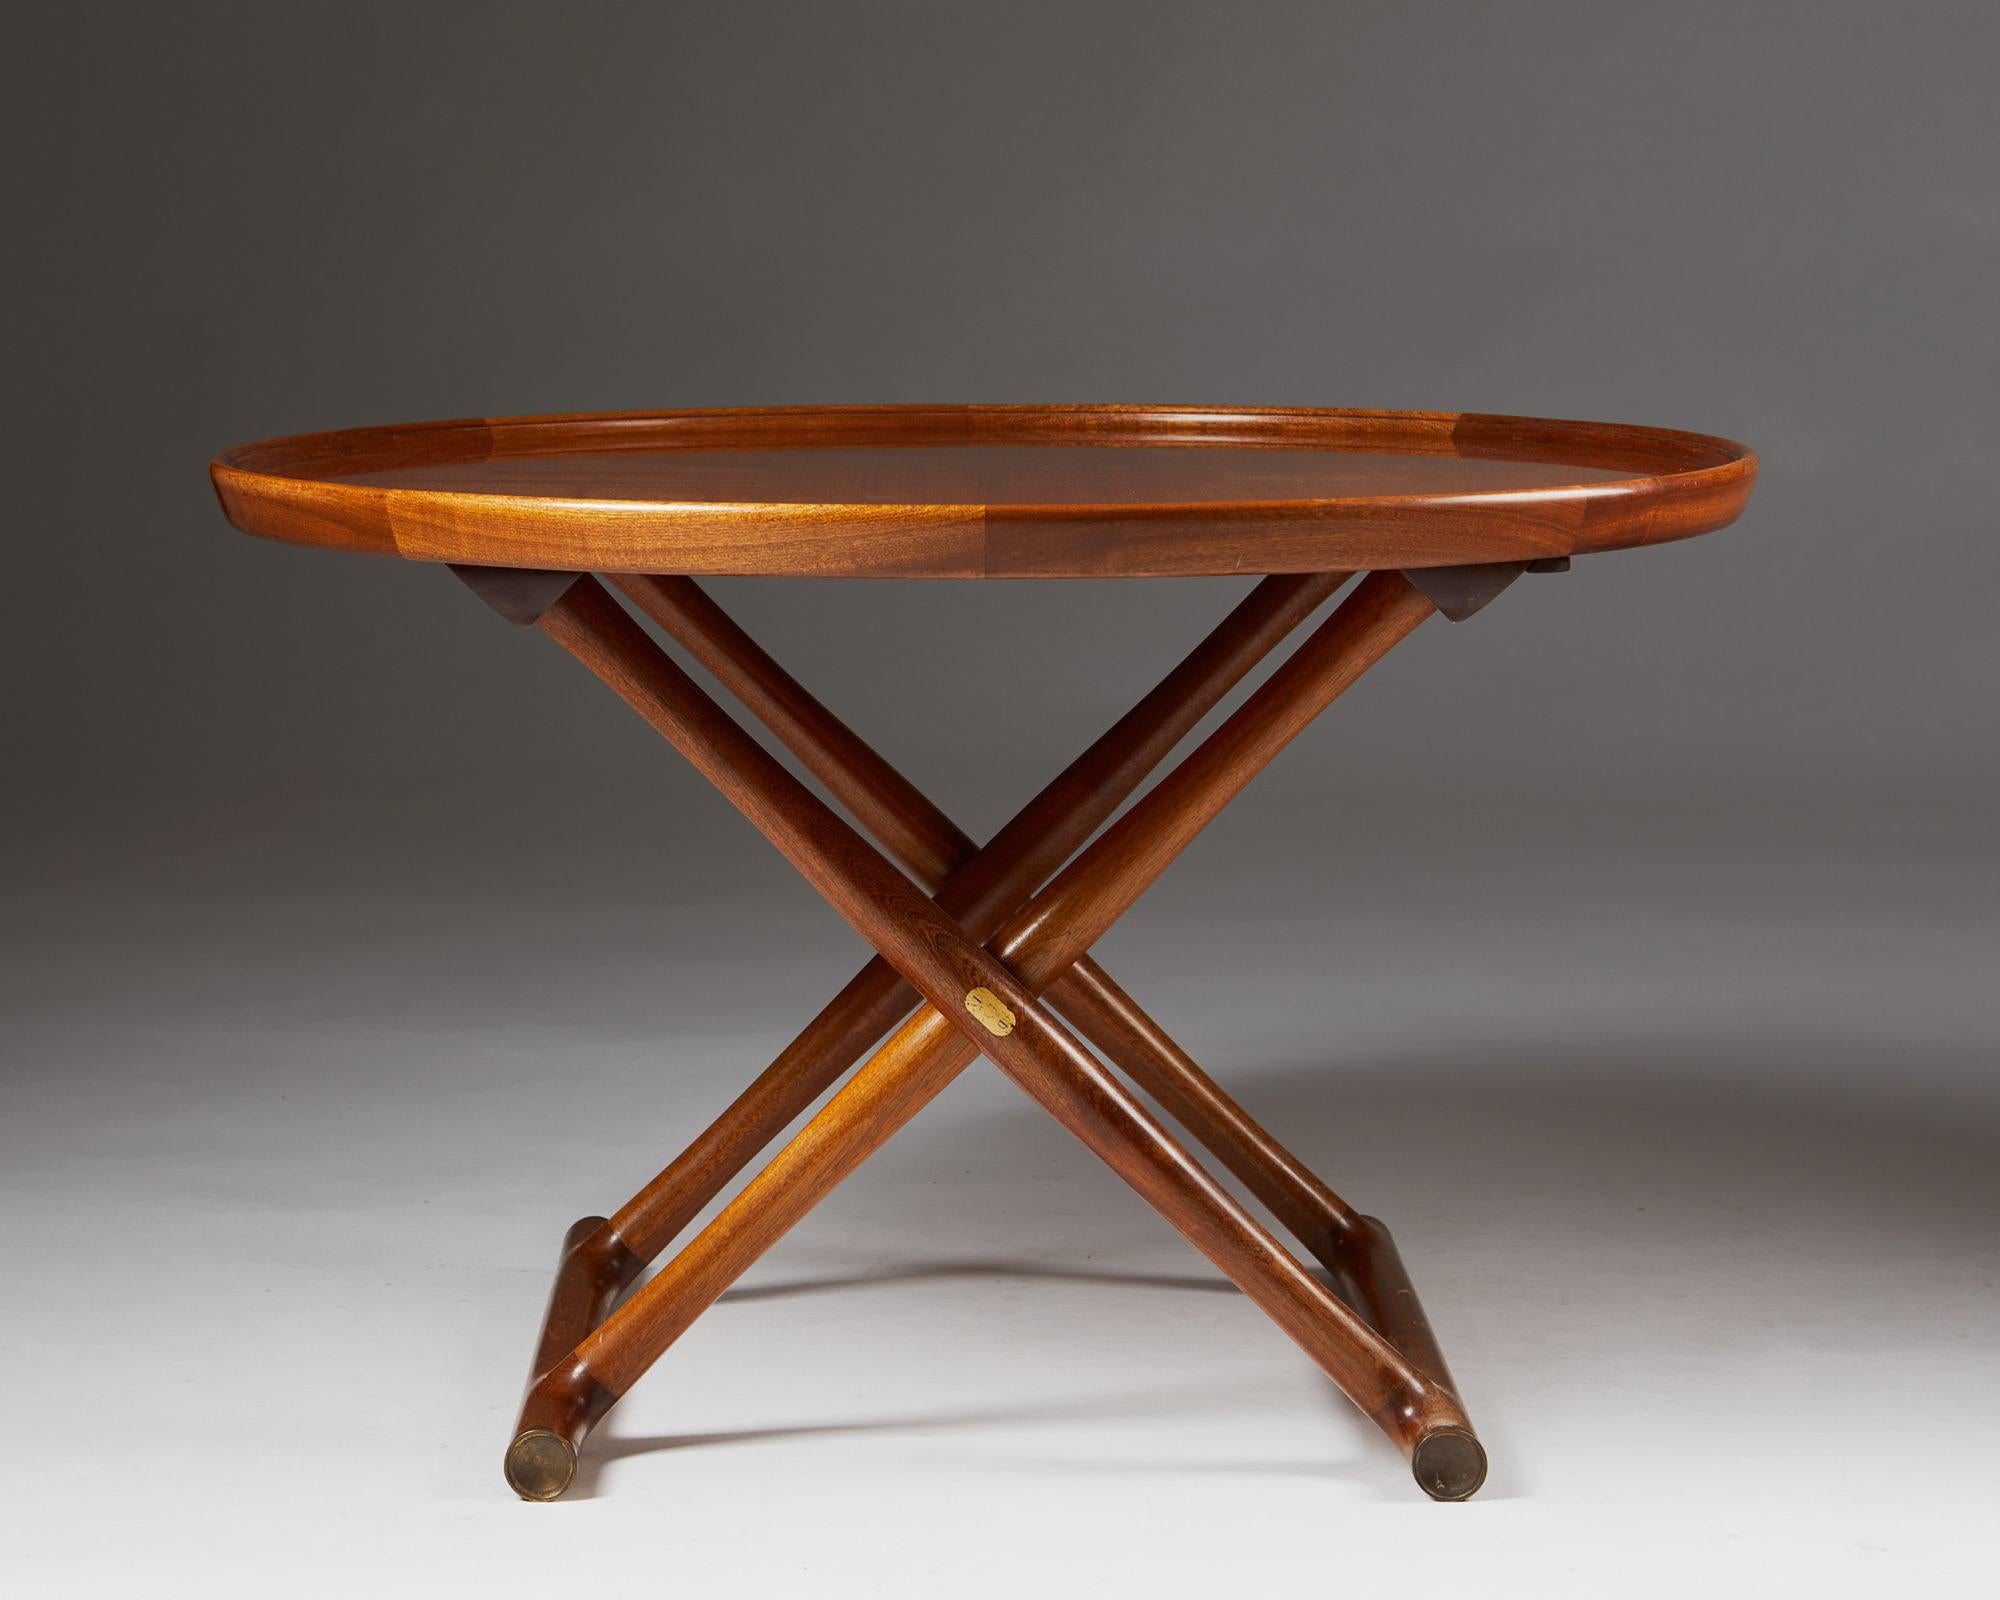 Occasional table “Egyptian Table” designed by Mogens Lassen, Denmark, 1940s. Mahogany and brass.